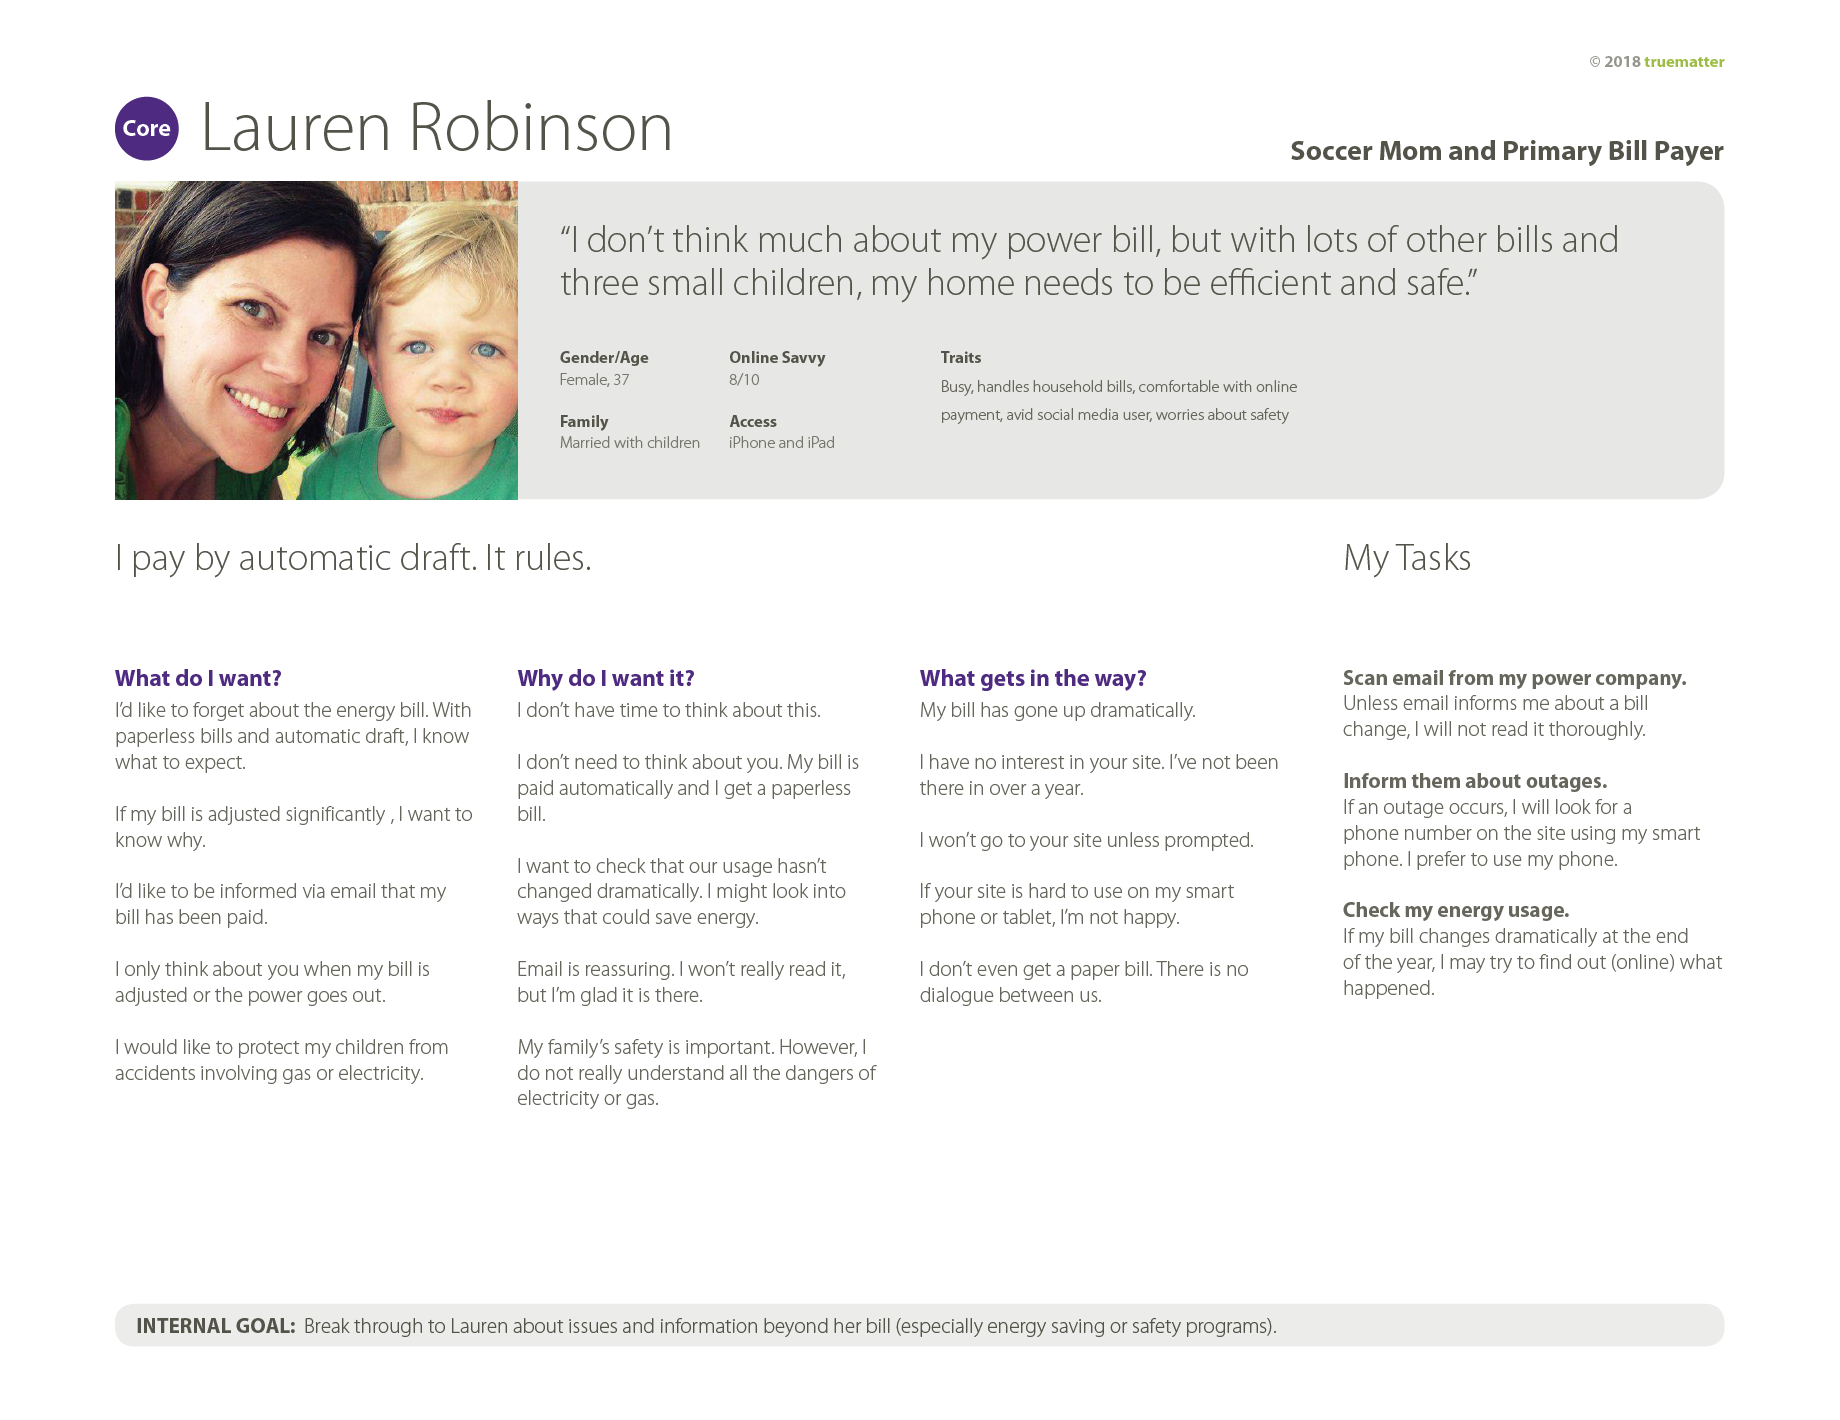 An image of a completed truematter persona sheet. There is a picture of a woman with her son, with her name, 